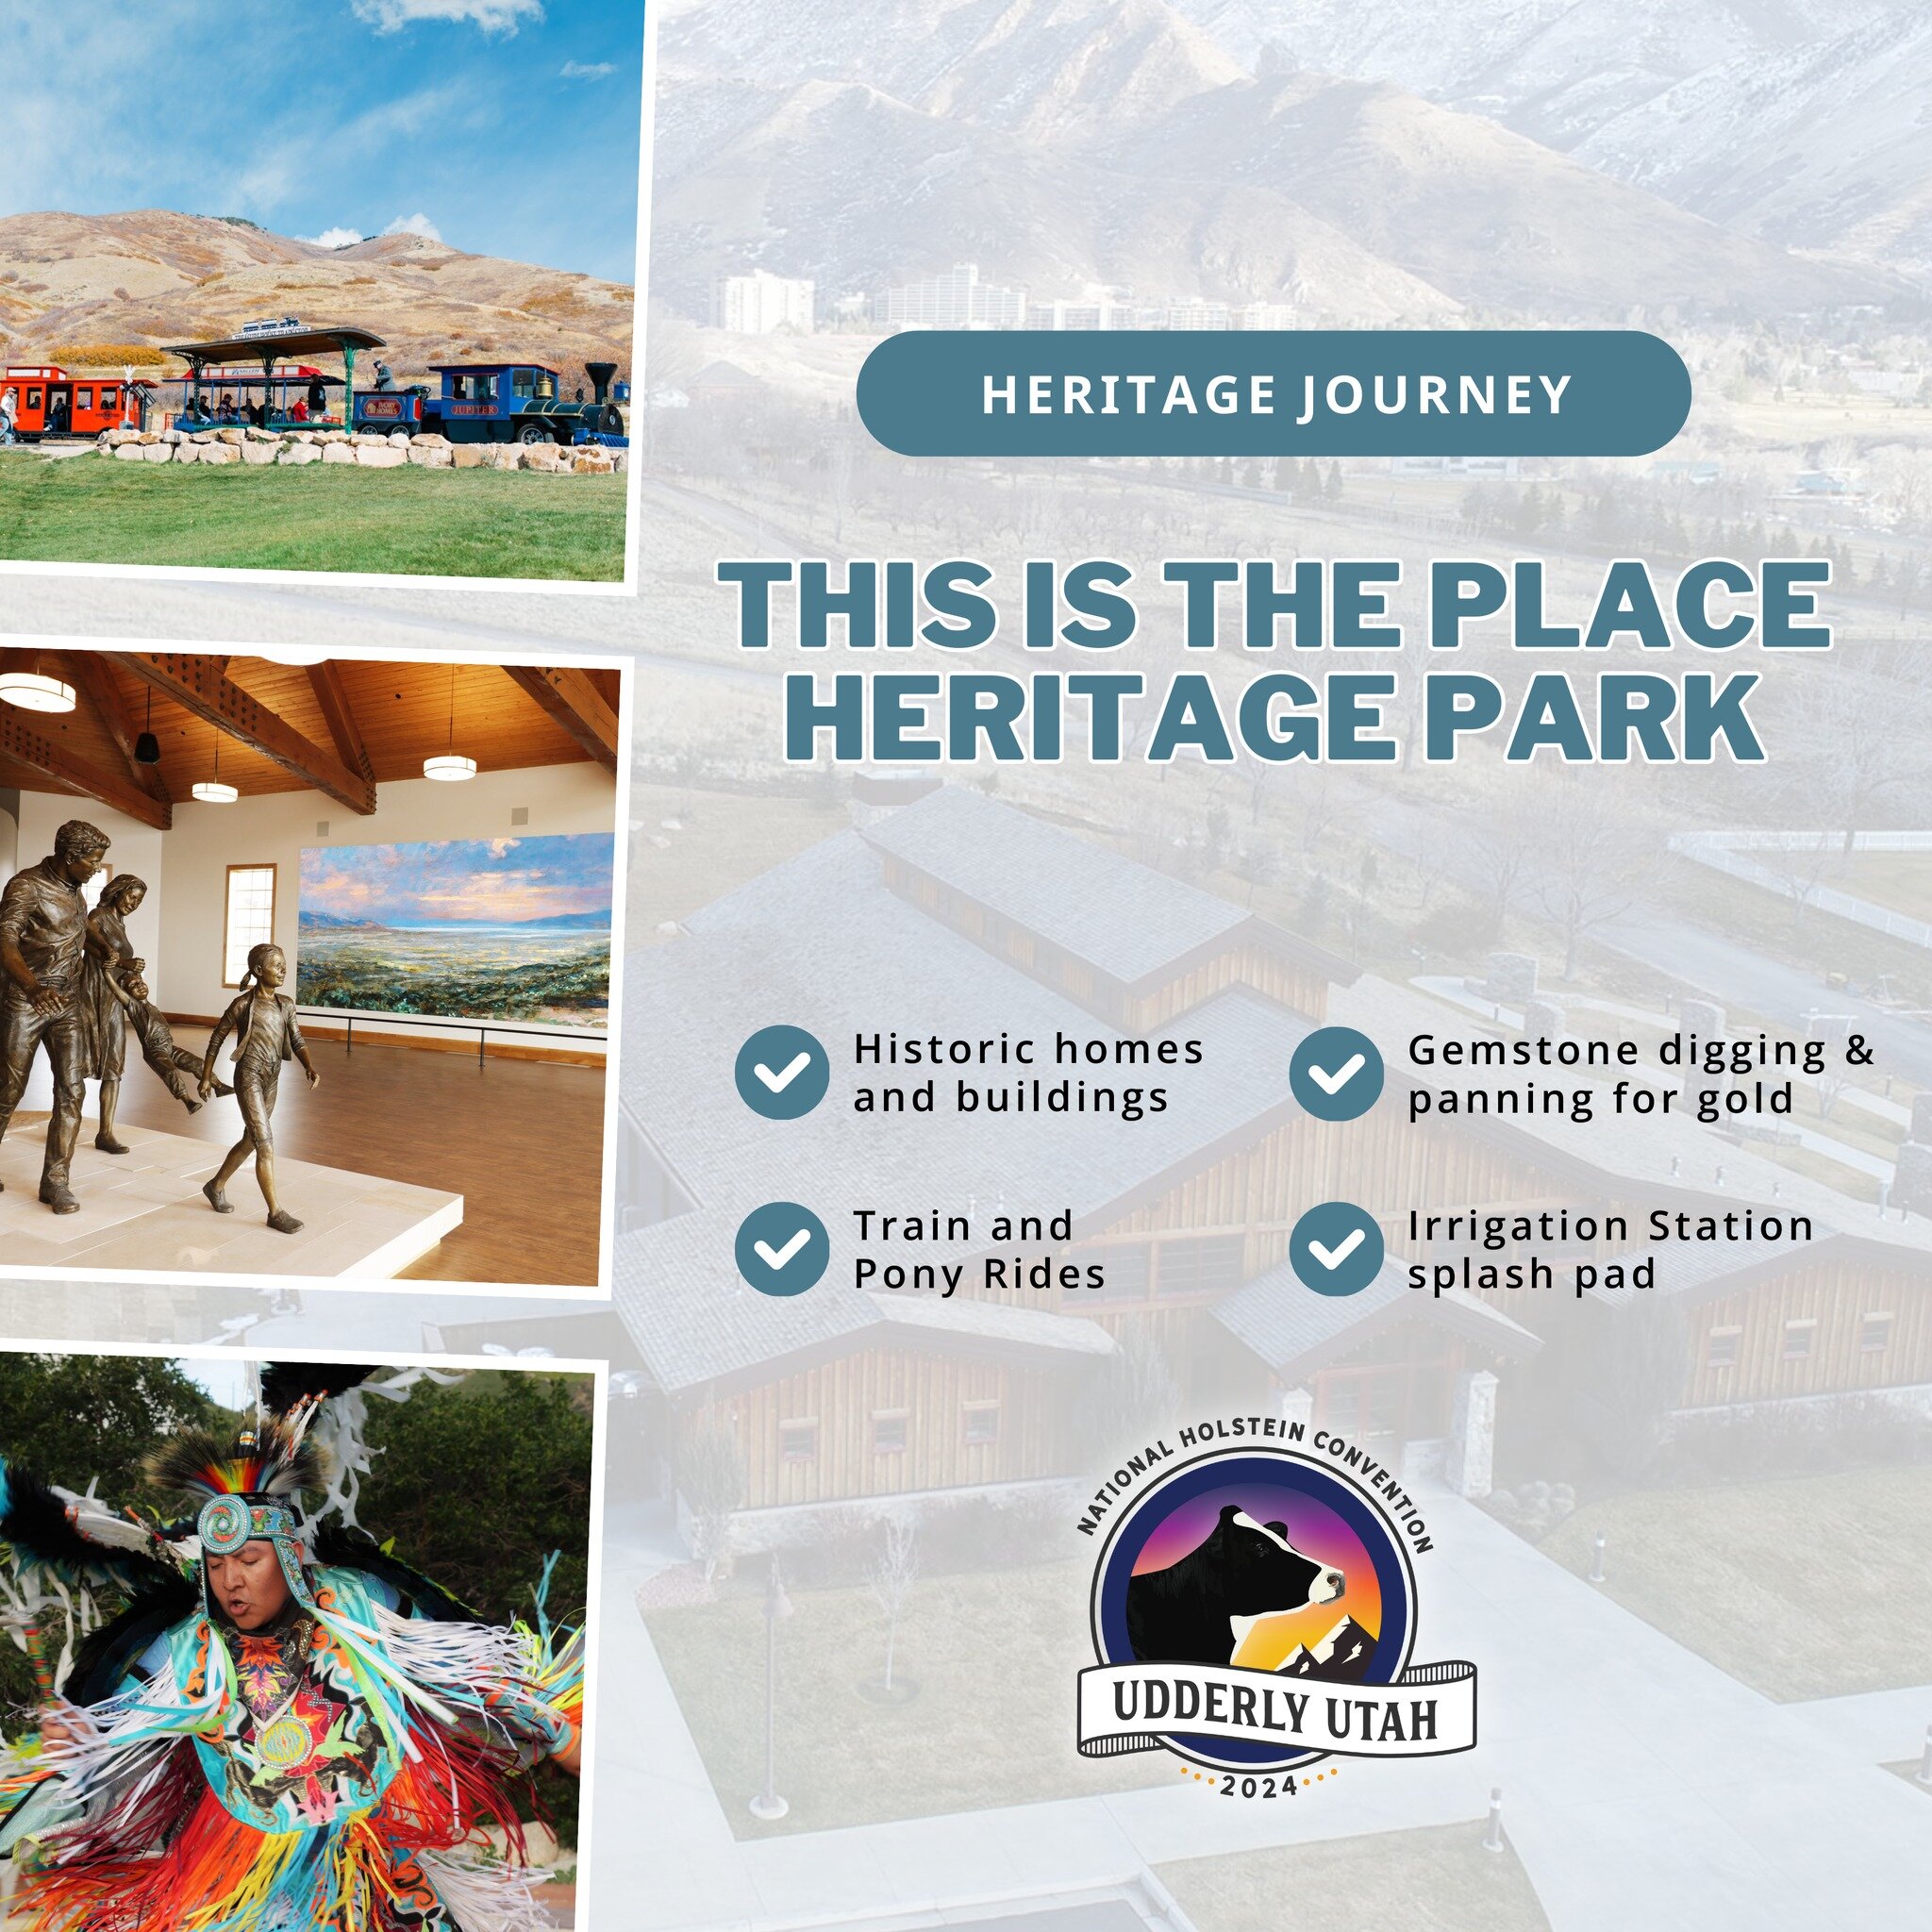 Enjoy a tapestry of the past where history takes center stage at This Is The Place. 🏔️📍

Enjoy lunch and ice cream before exploring over 50 meticulously preserved historic homes and buildings, historic memorials, mining, gemstone digging, panning f